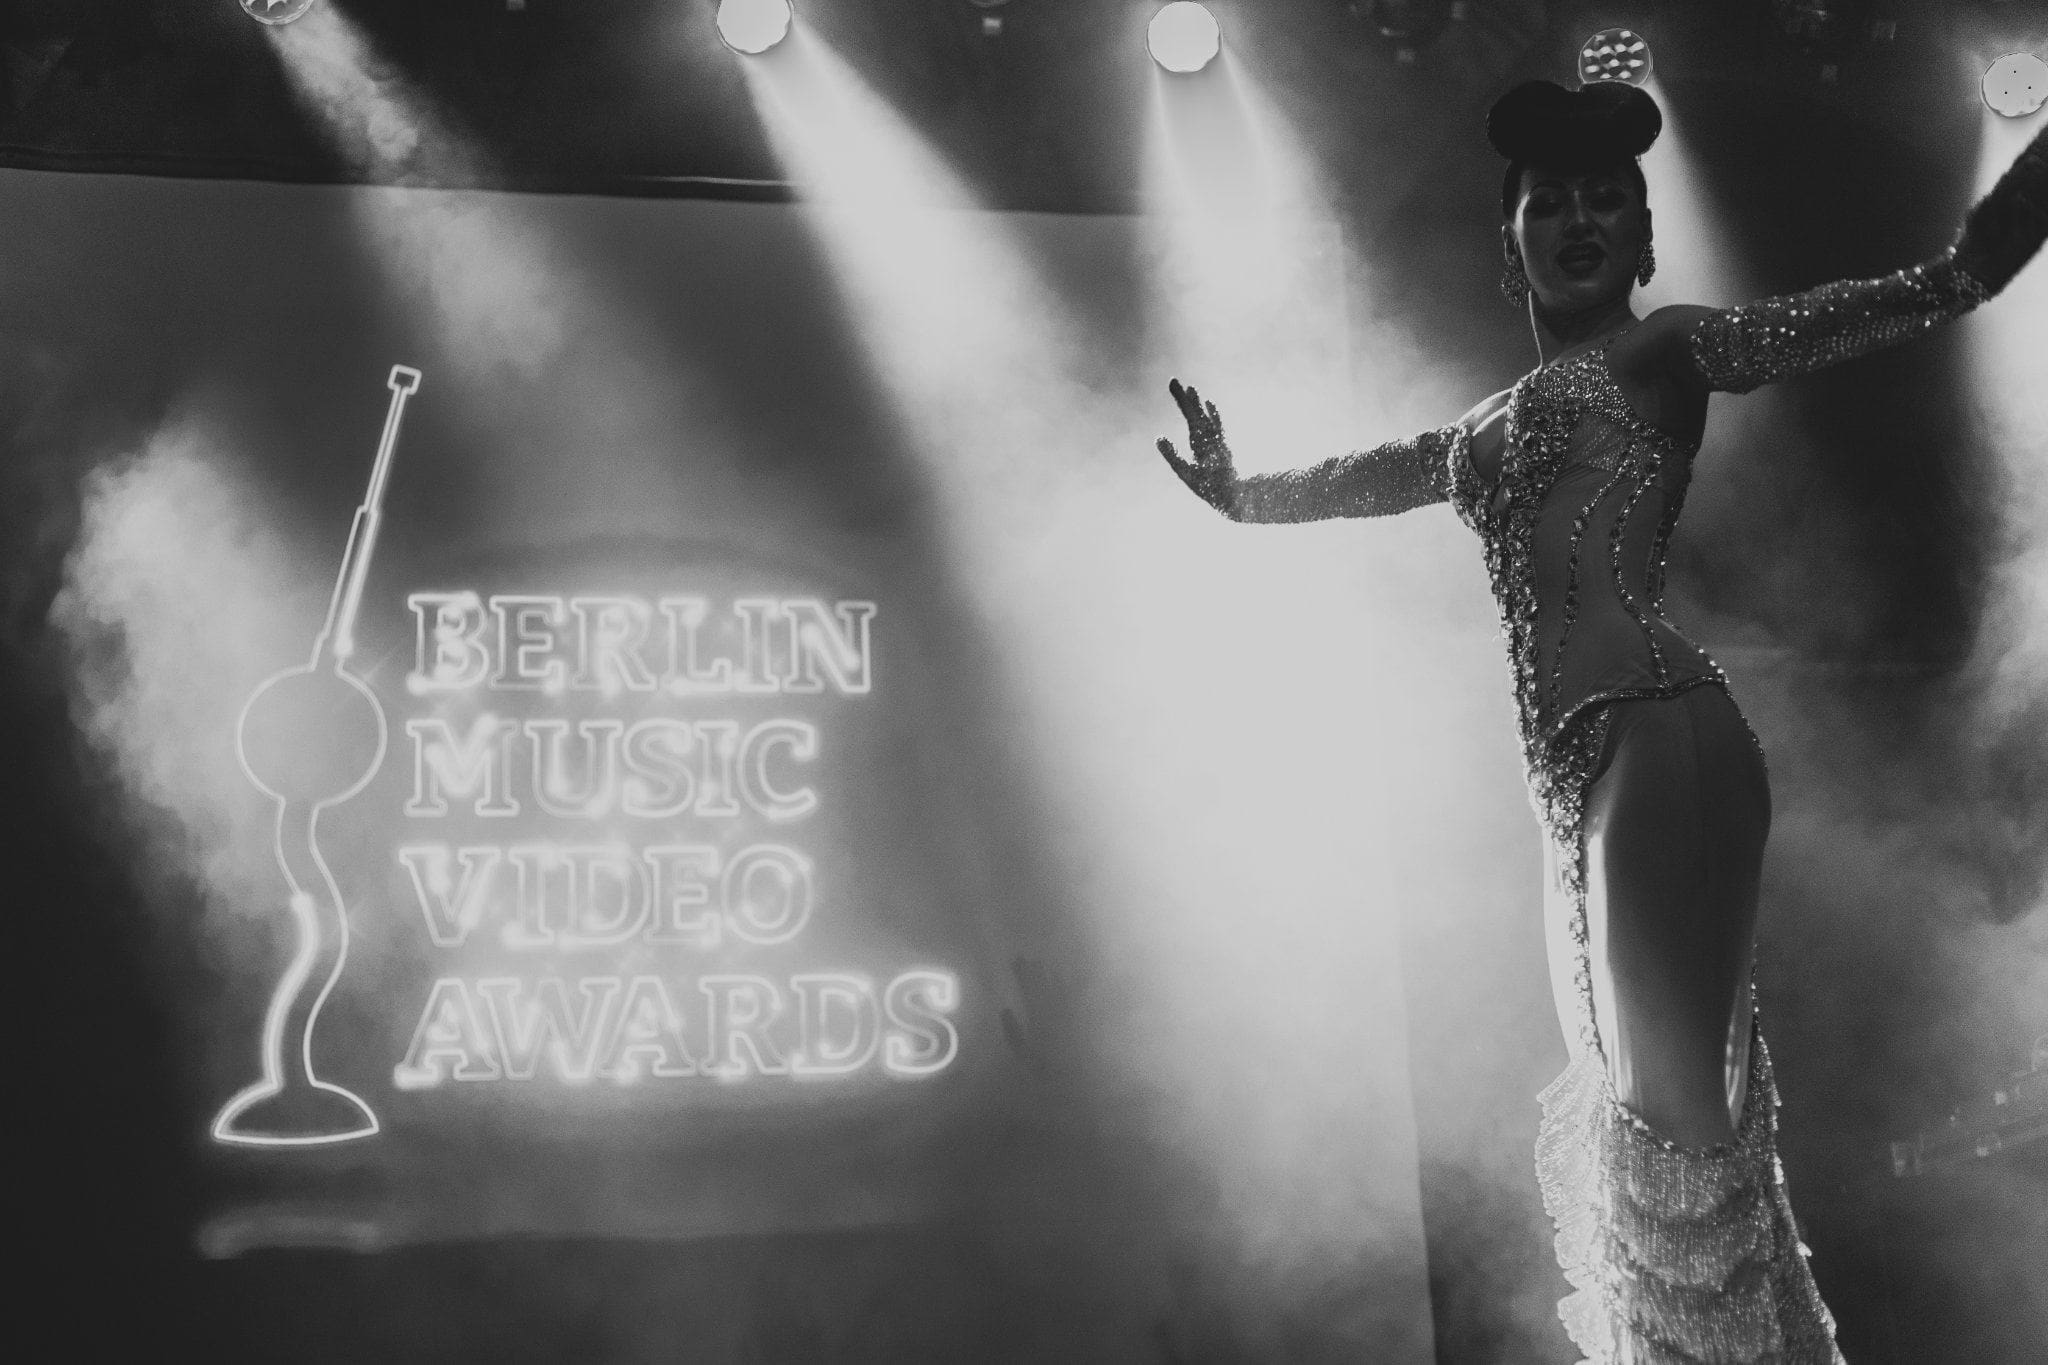 The Berlin Music Video Awards are upon us again